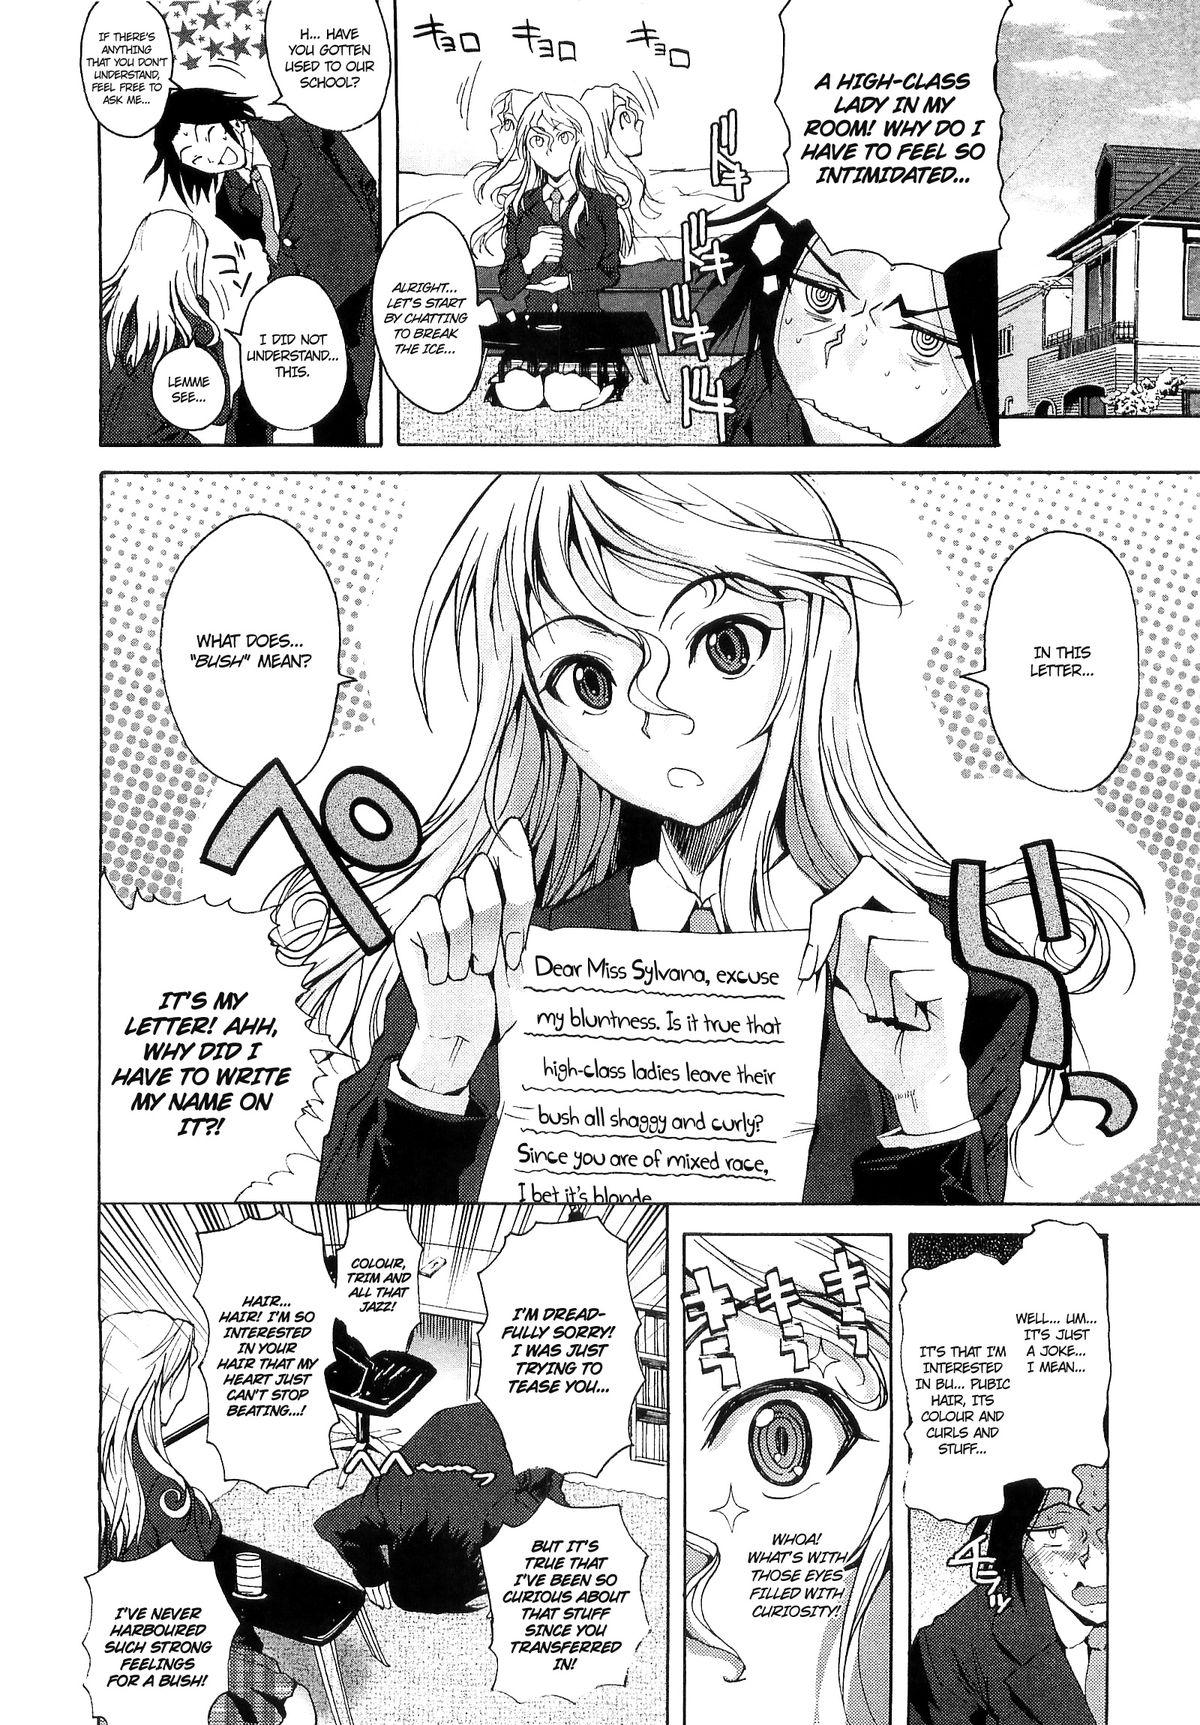 Spooning Henbumi | Lewd Letter Love Making - Page 4